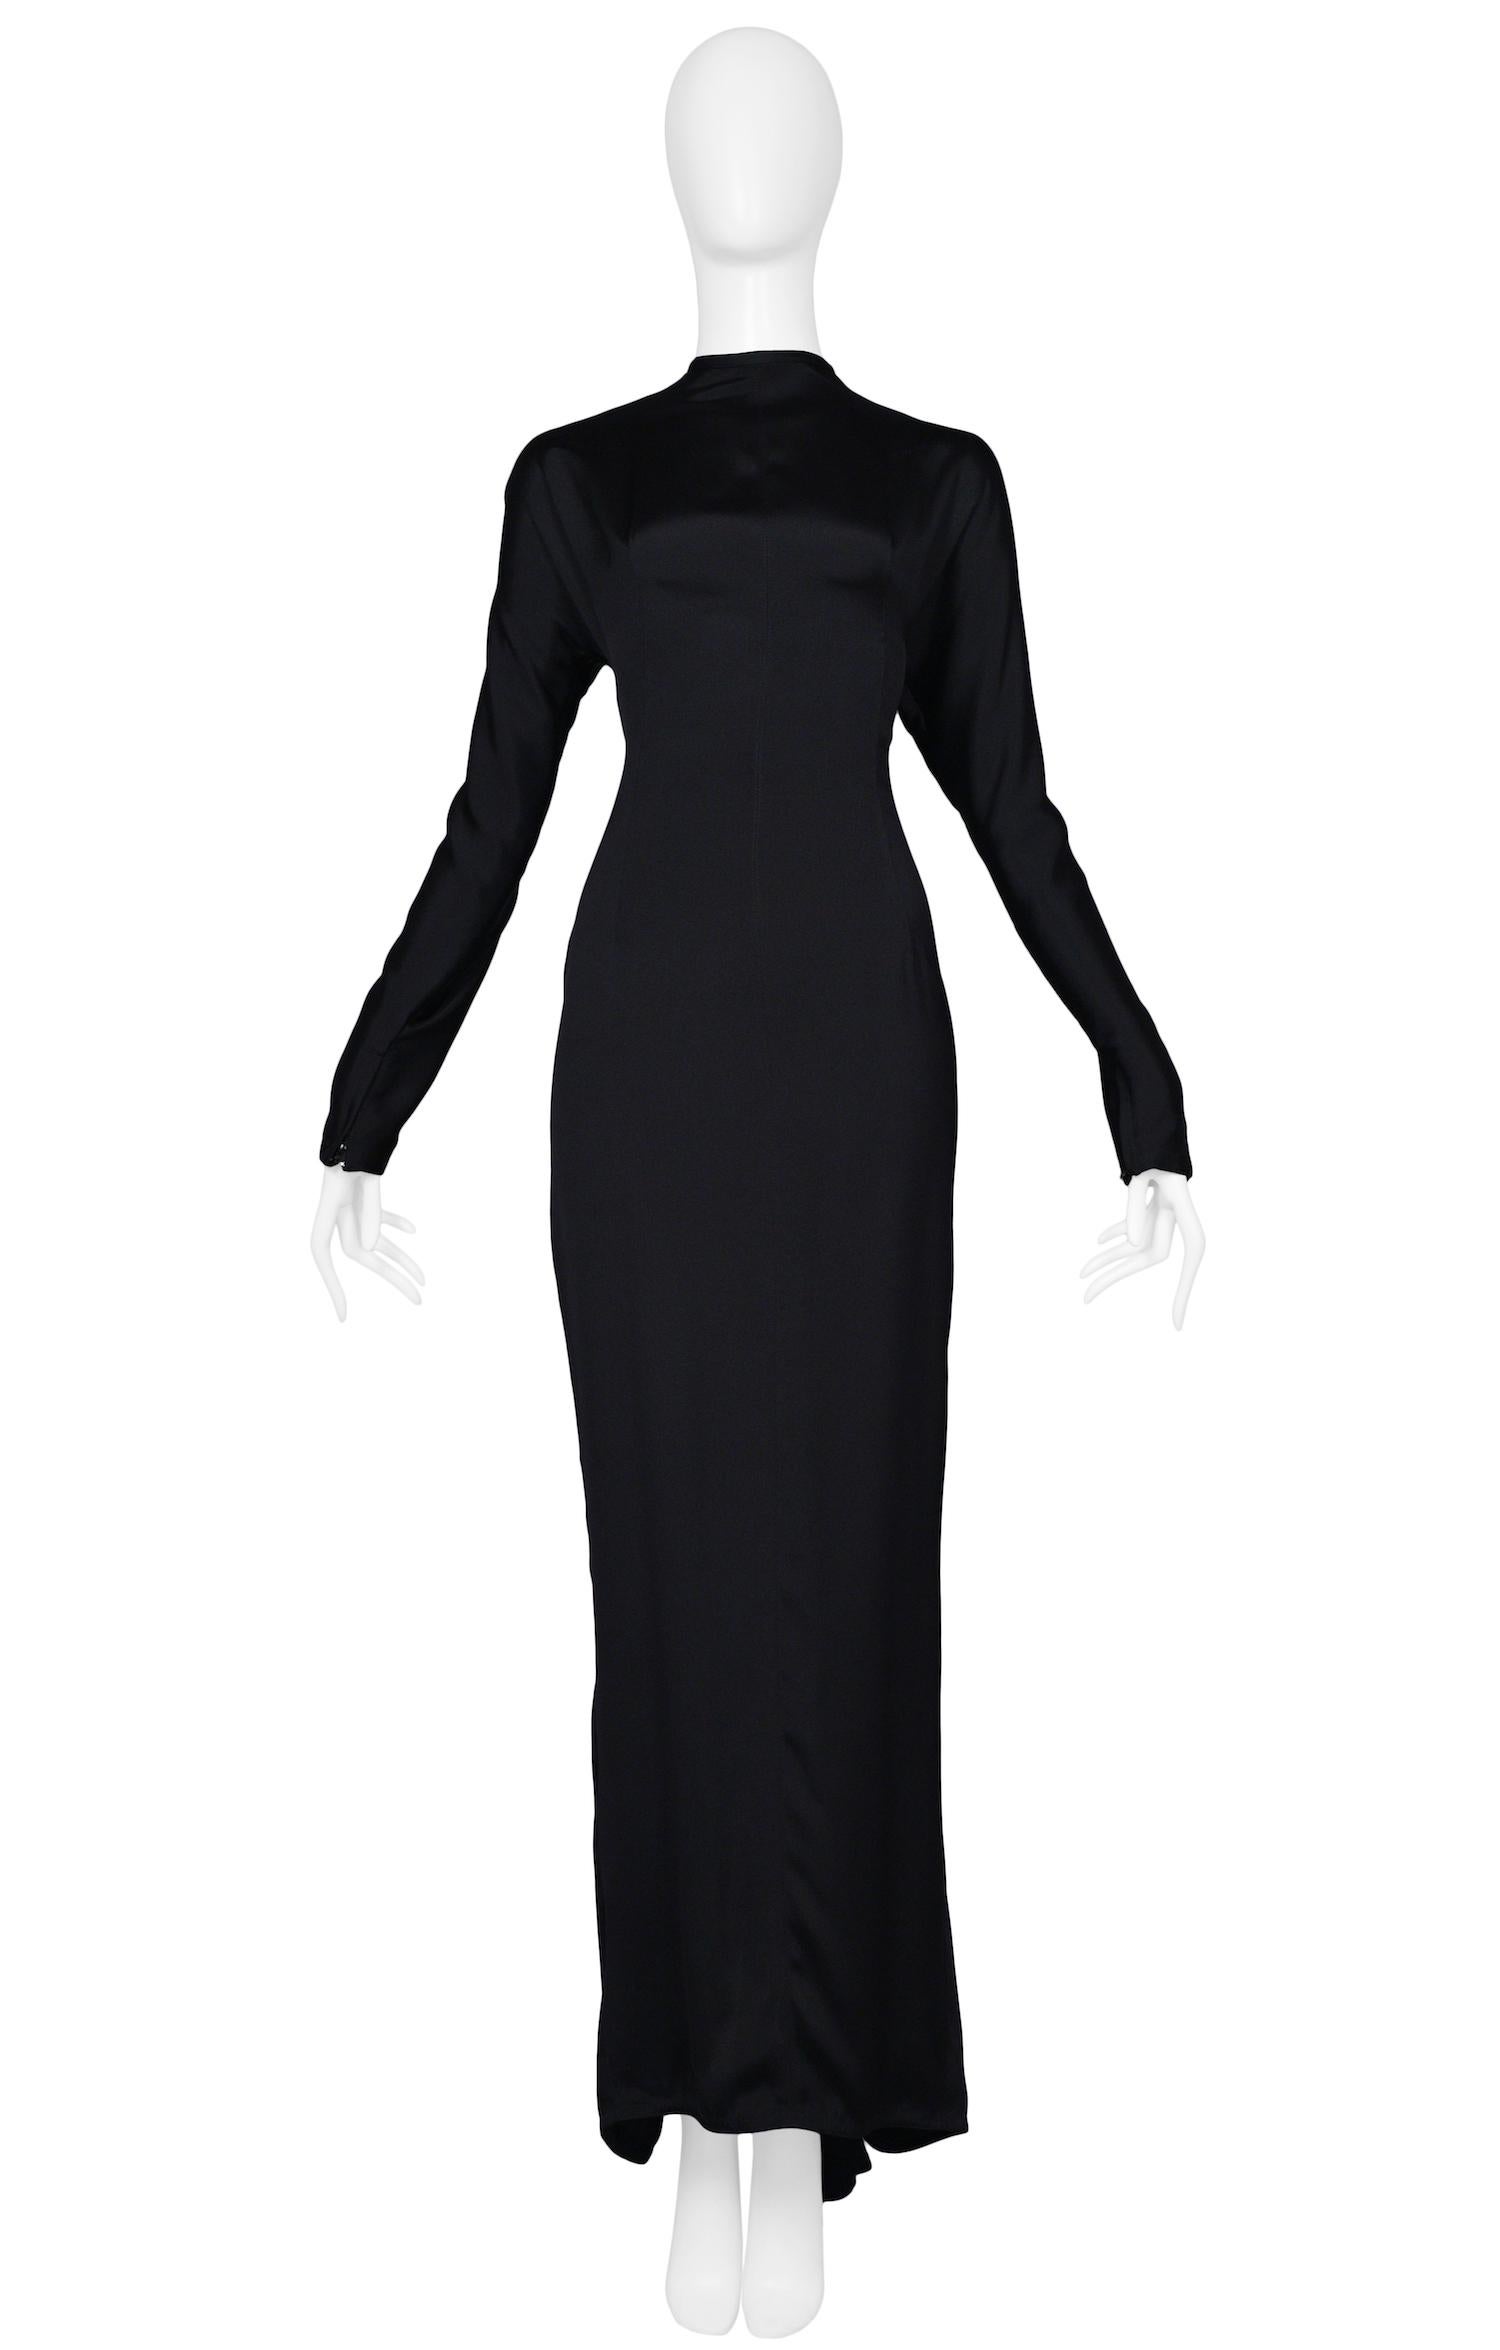 Vintage Gianni Versace black jersey long sleeve gown featuring an ornate silver and black beaded cutout back in a quintessential art deco design and a godet at the center back hem. Circa 1986-87.

Excellent Vintage Condition.

Size